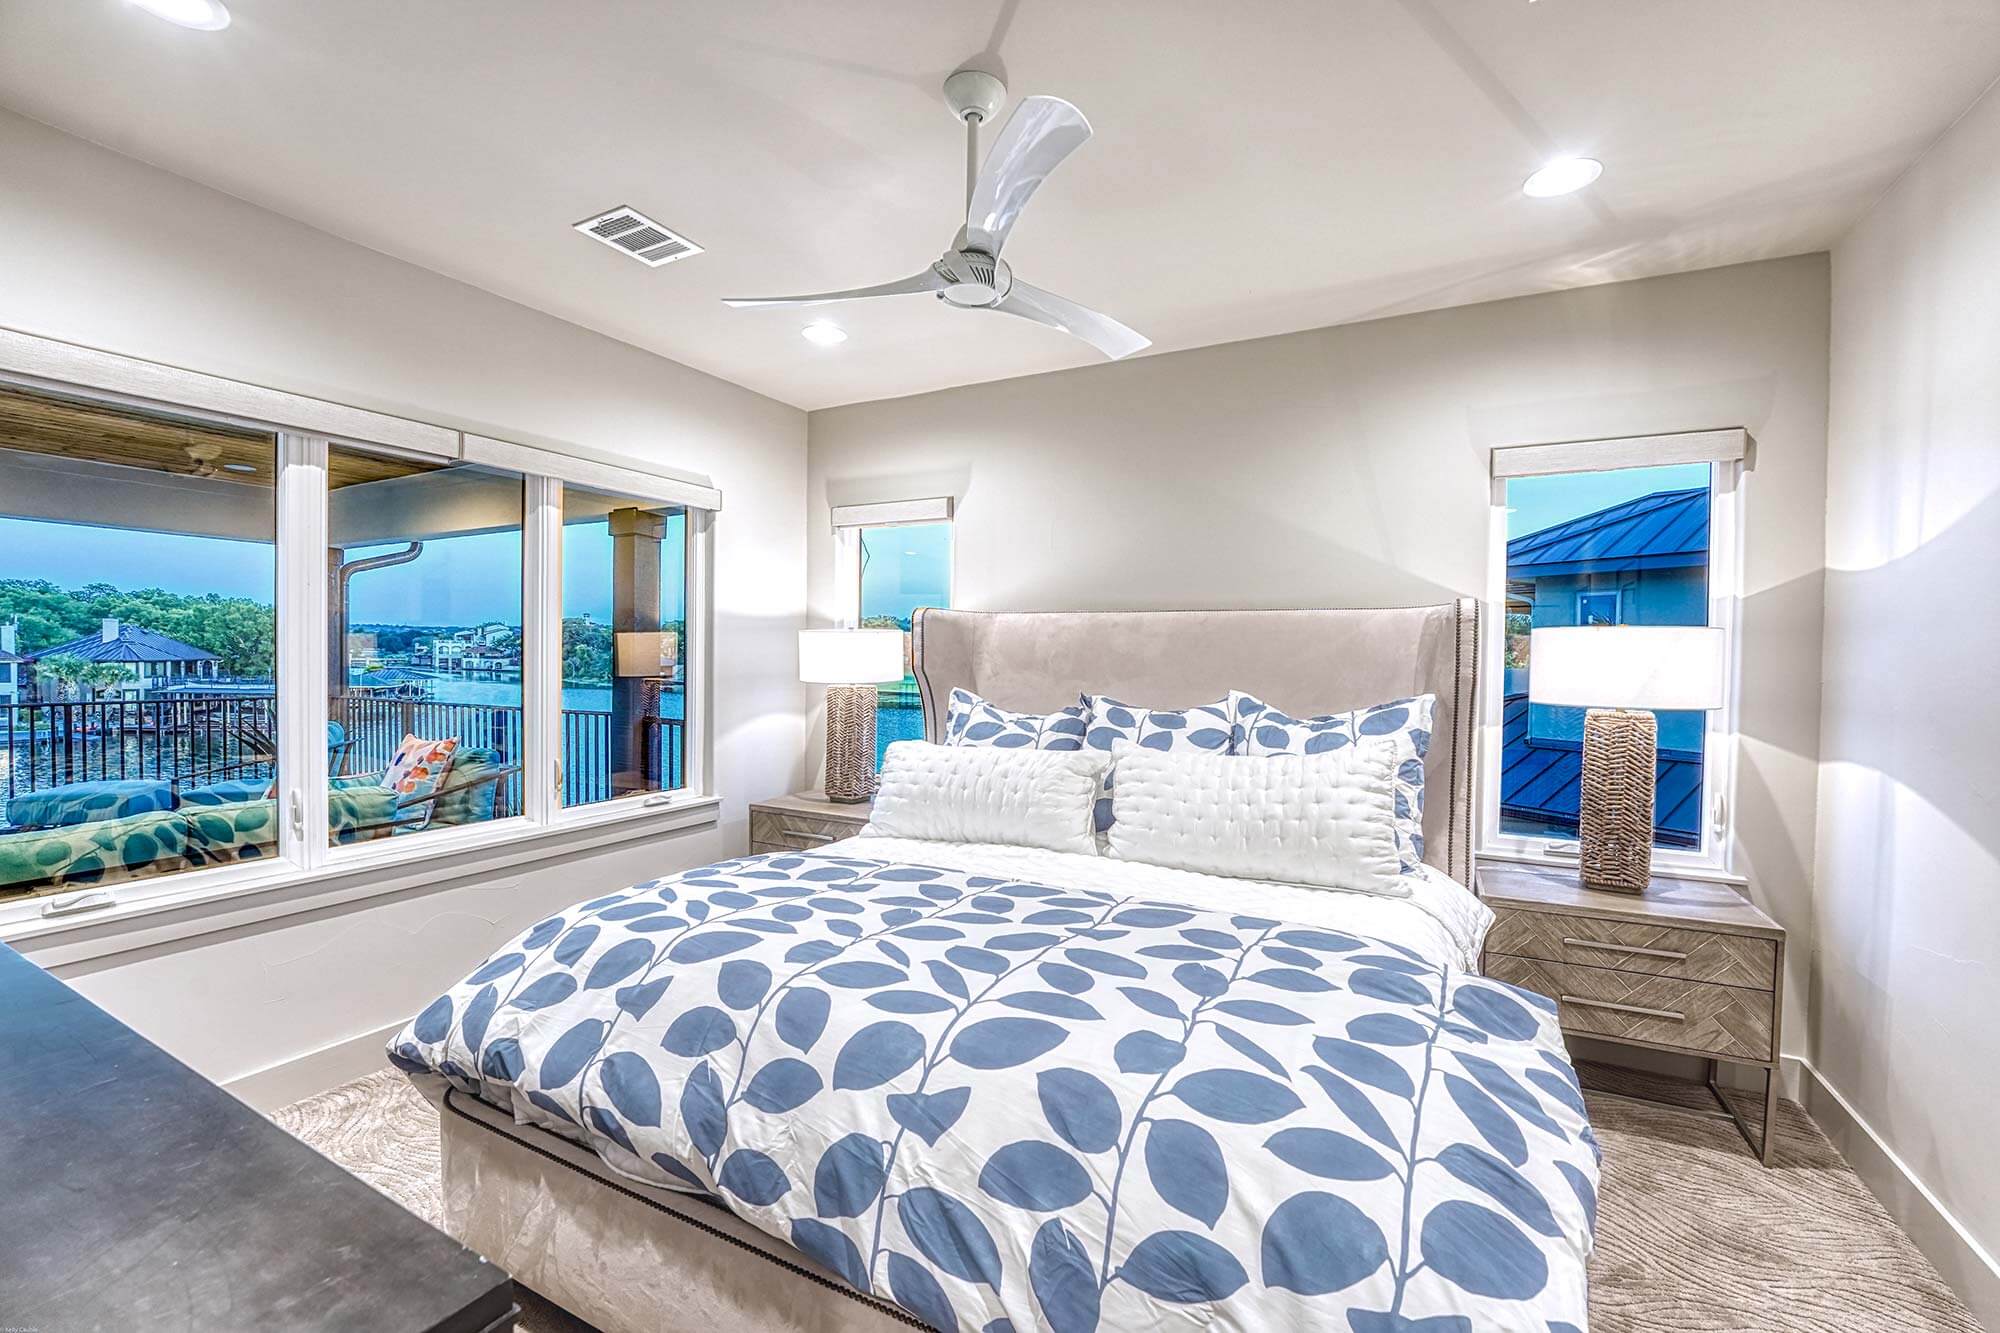 Zbranek and Holt Custom Homes Soft Modern Transitional Bedroom 4 Overlooking Lake and Pool